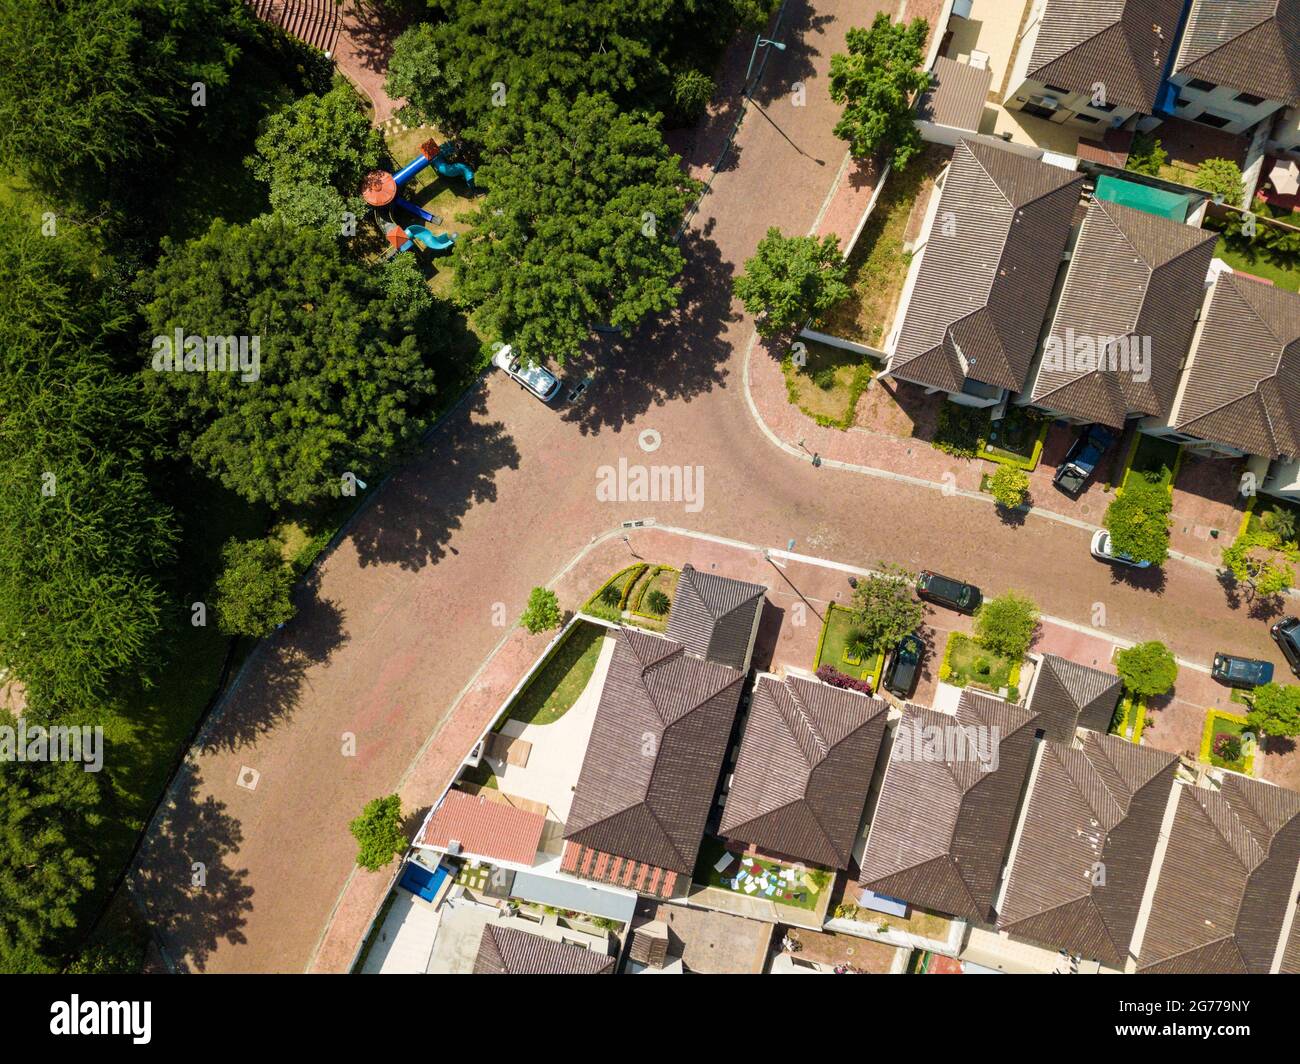 An aerial view of houses of a gated community un Guayaquil, Ecuador. Sunny day. Rooftops, playgrounds, trees, homes build next to each other. Stock Photo